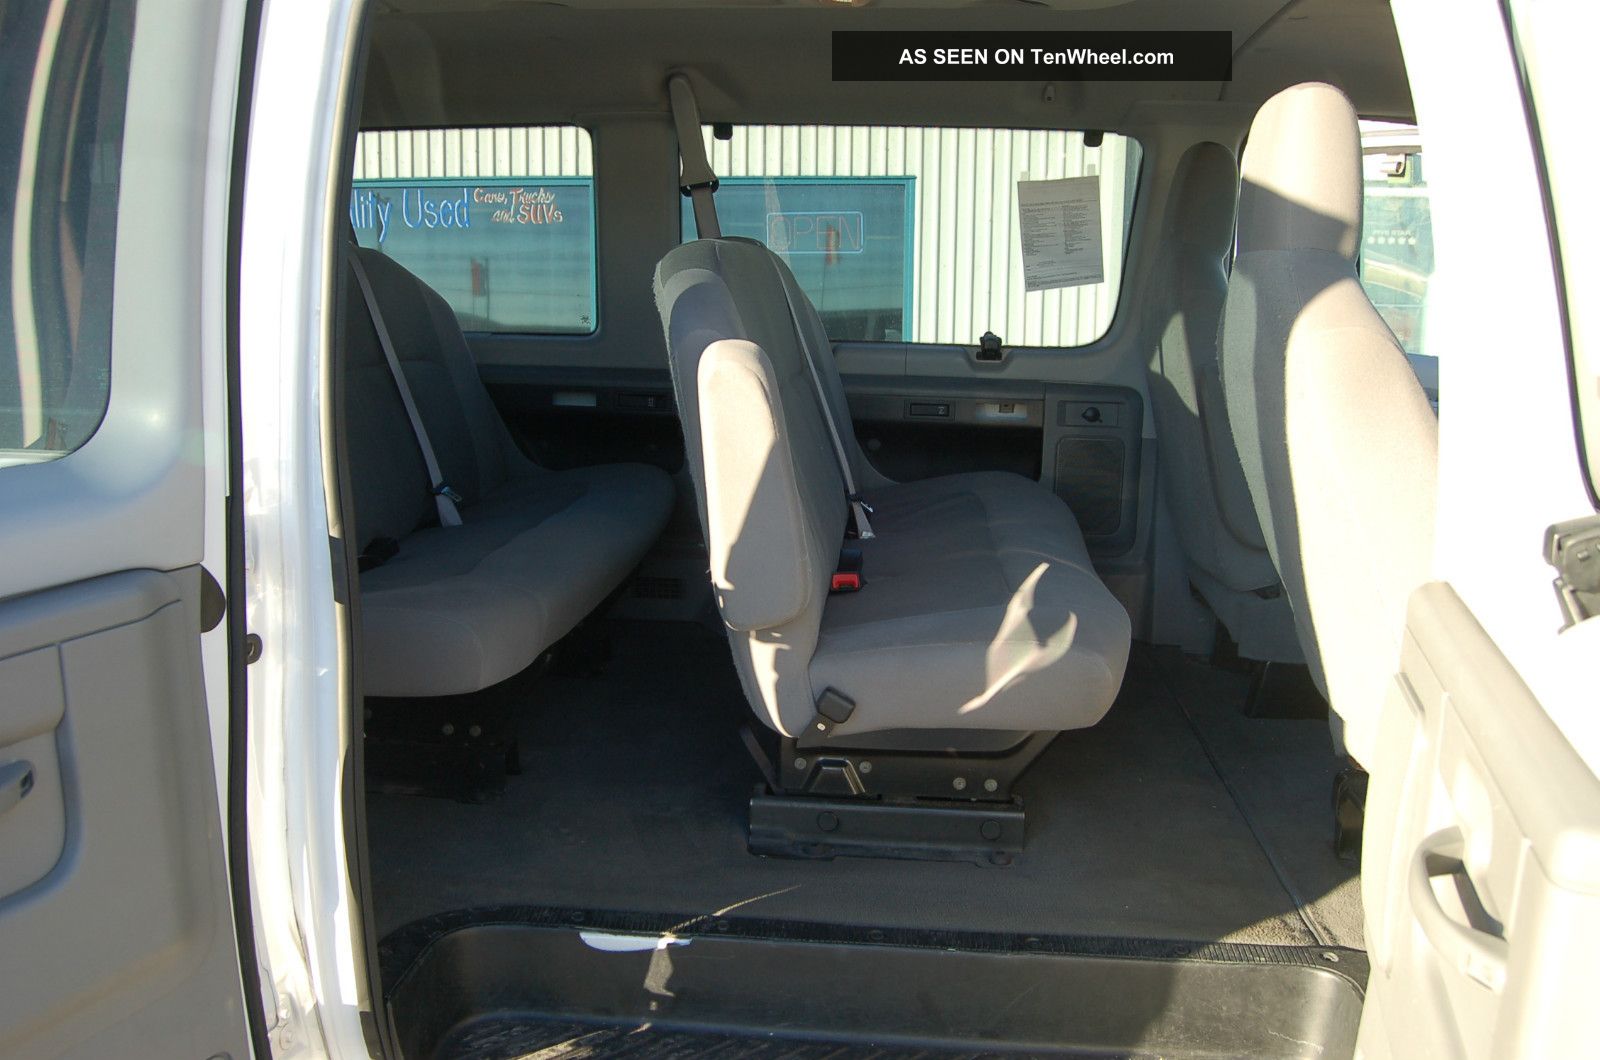 2010 Ford E Series Van Information And Photos Neo Drive